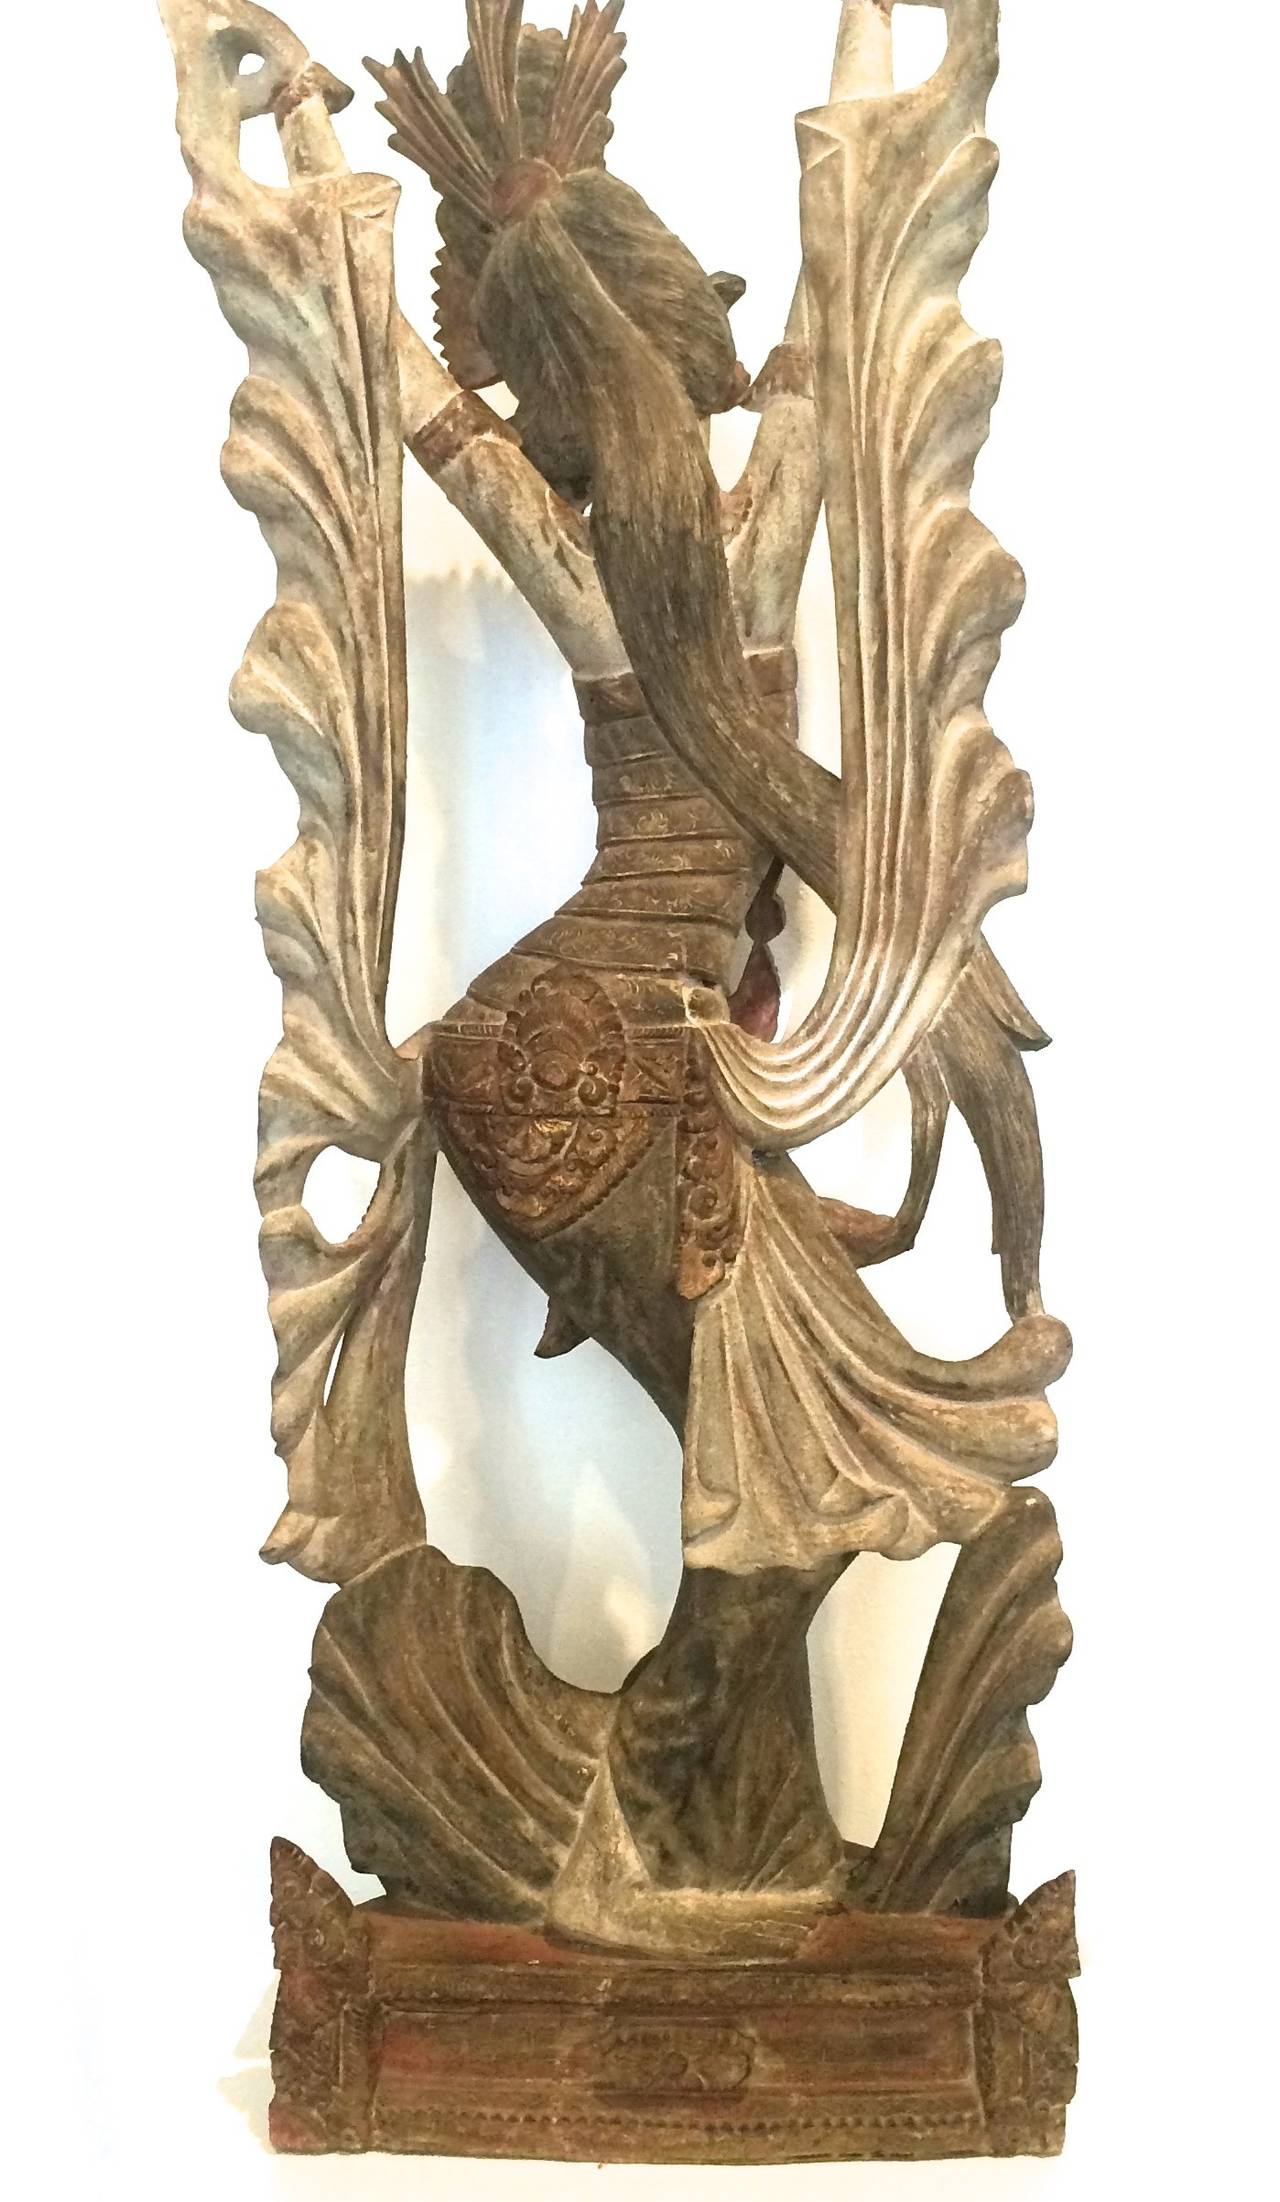  Wood Sculpture of a Dancer Bali - Brown Figurative Sculpture by Unknown